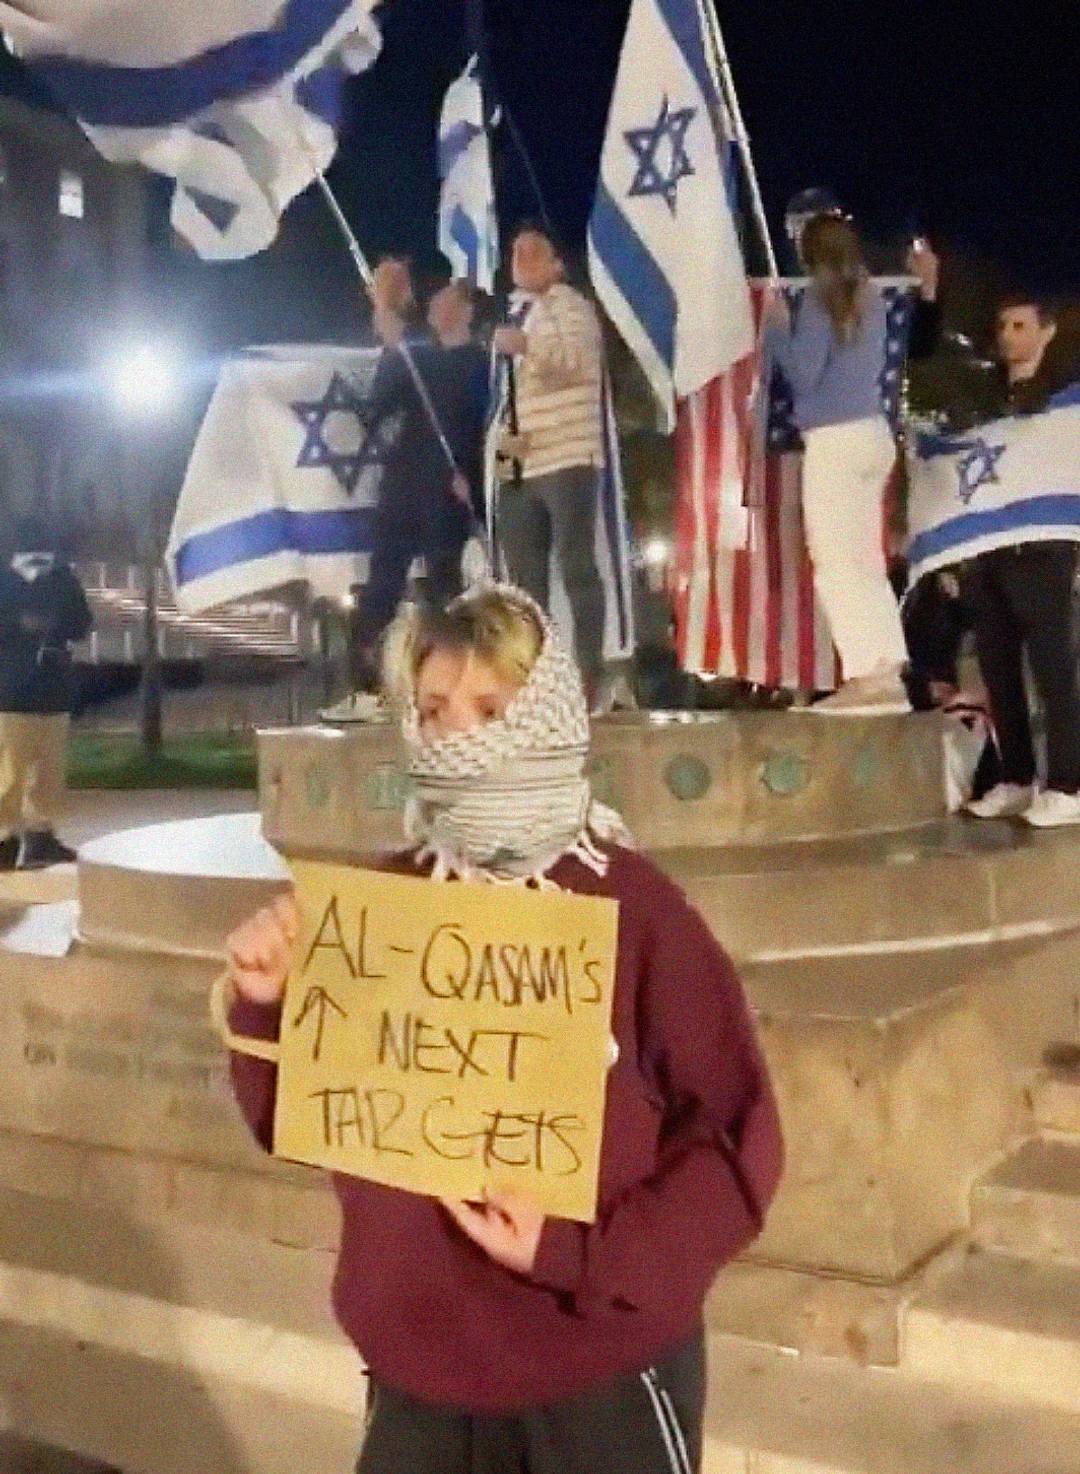 An anti-Israel demonstrator at Columbia University holds a sign reading ‘Al-Qasam’s next targets,’ with an arrow pointing at Jewish students